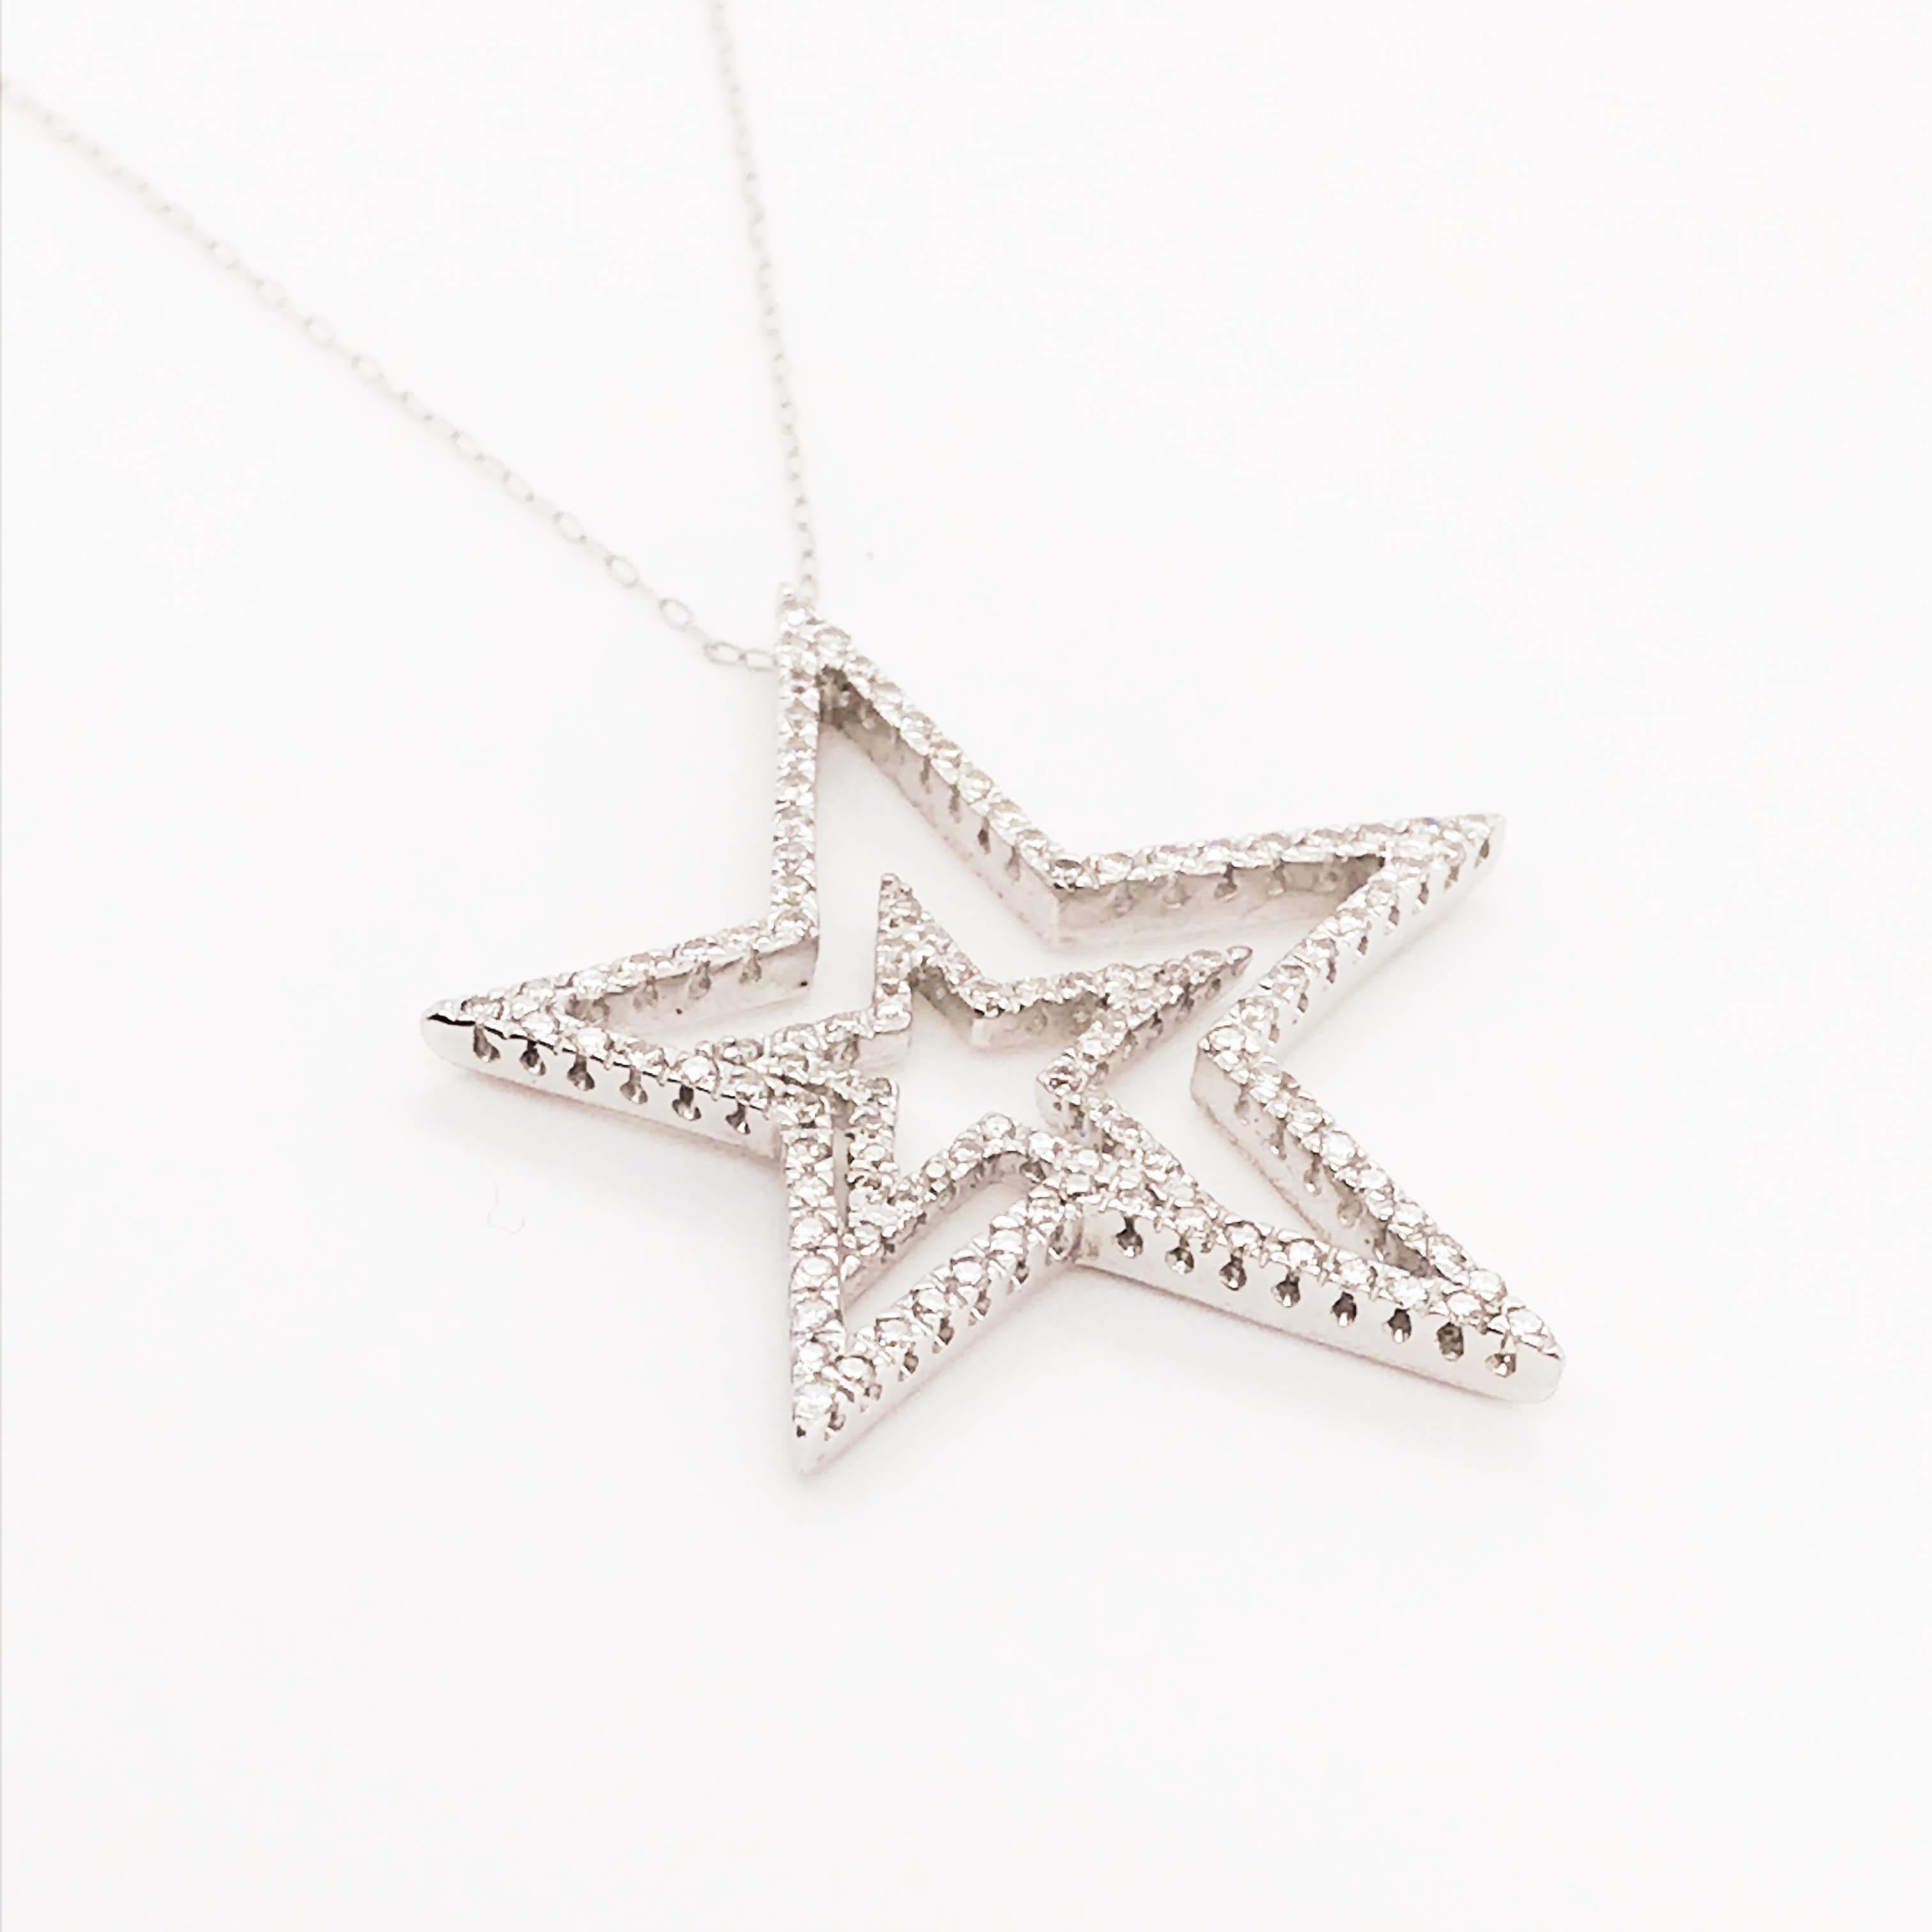 The gorgeous diamond star necklace is so special and unique! With half a carat of diamonds covered the top of this open double star design, this pedant is so sparkly and shiny! The double diamond star pendant is a one of a kind design with an